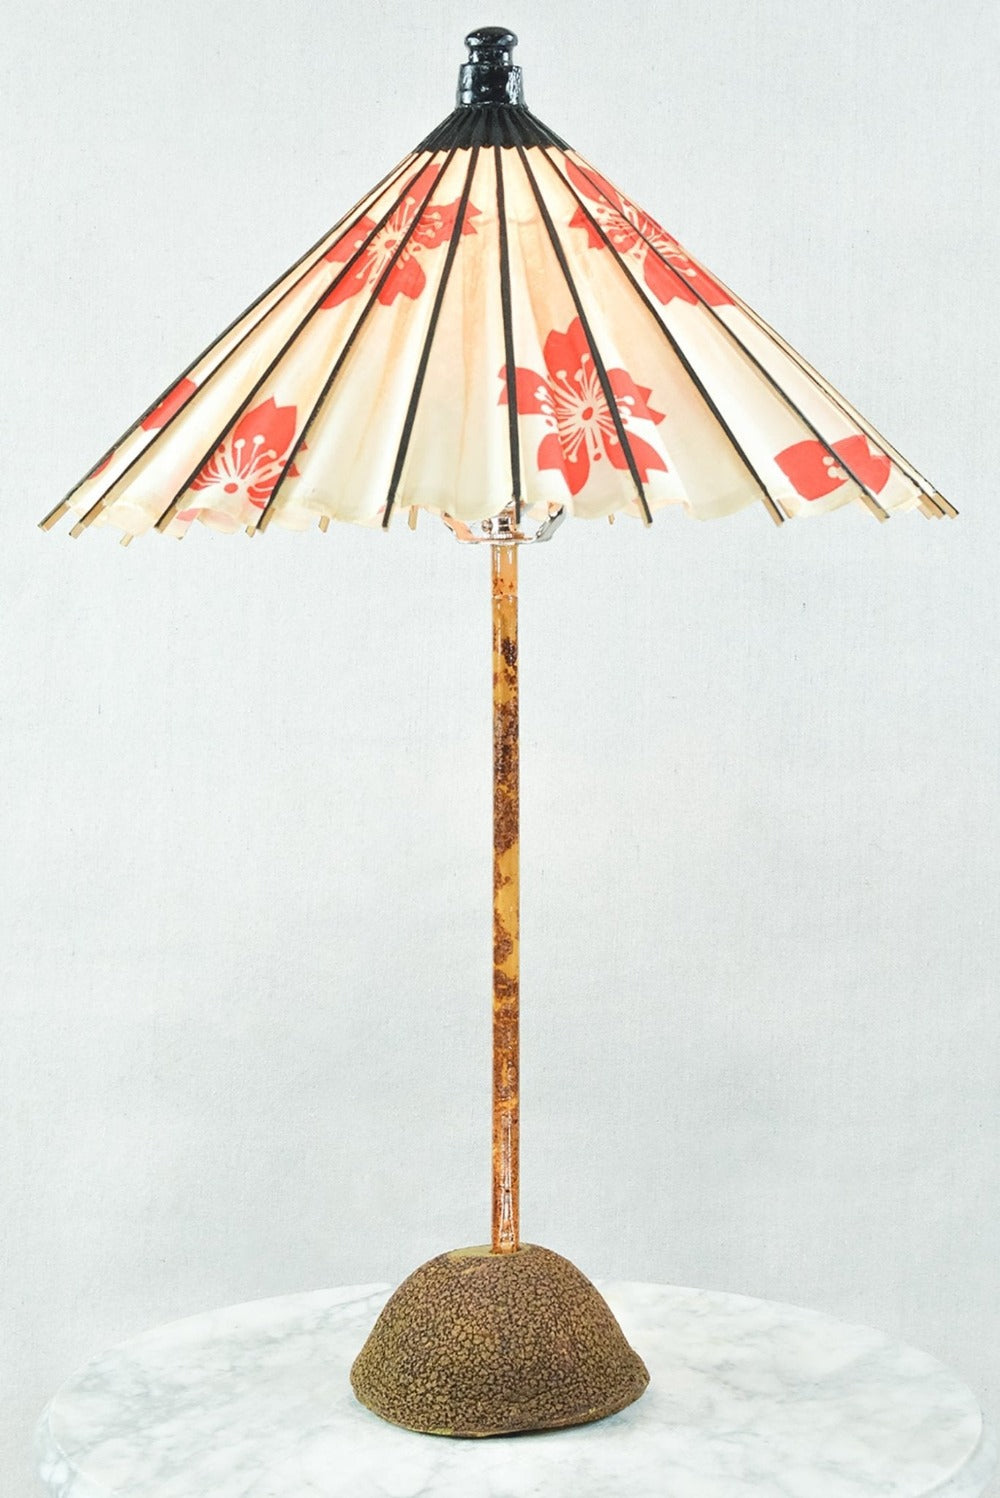 'Aloha Modern' Bamboo Table Lamp with Coconut Base and Japanese Hibiscus Parasol Shade — Model No. 018 - Tennant New York